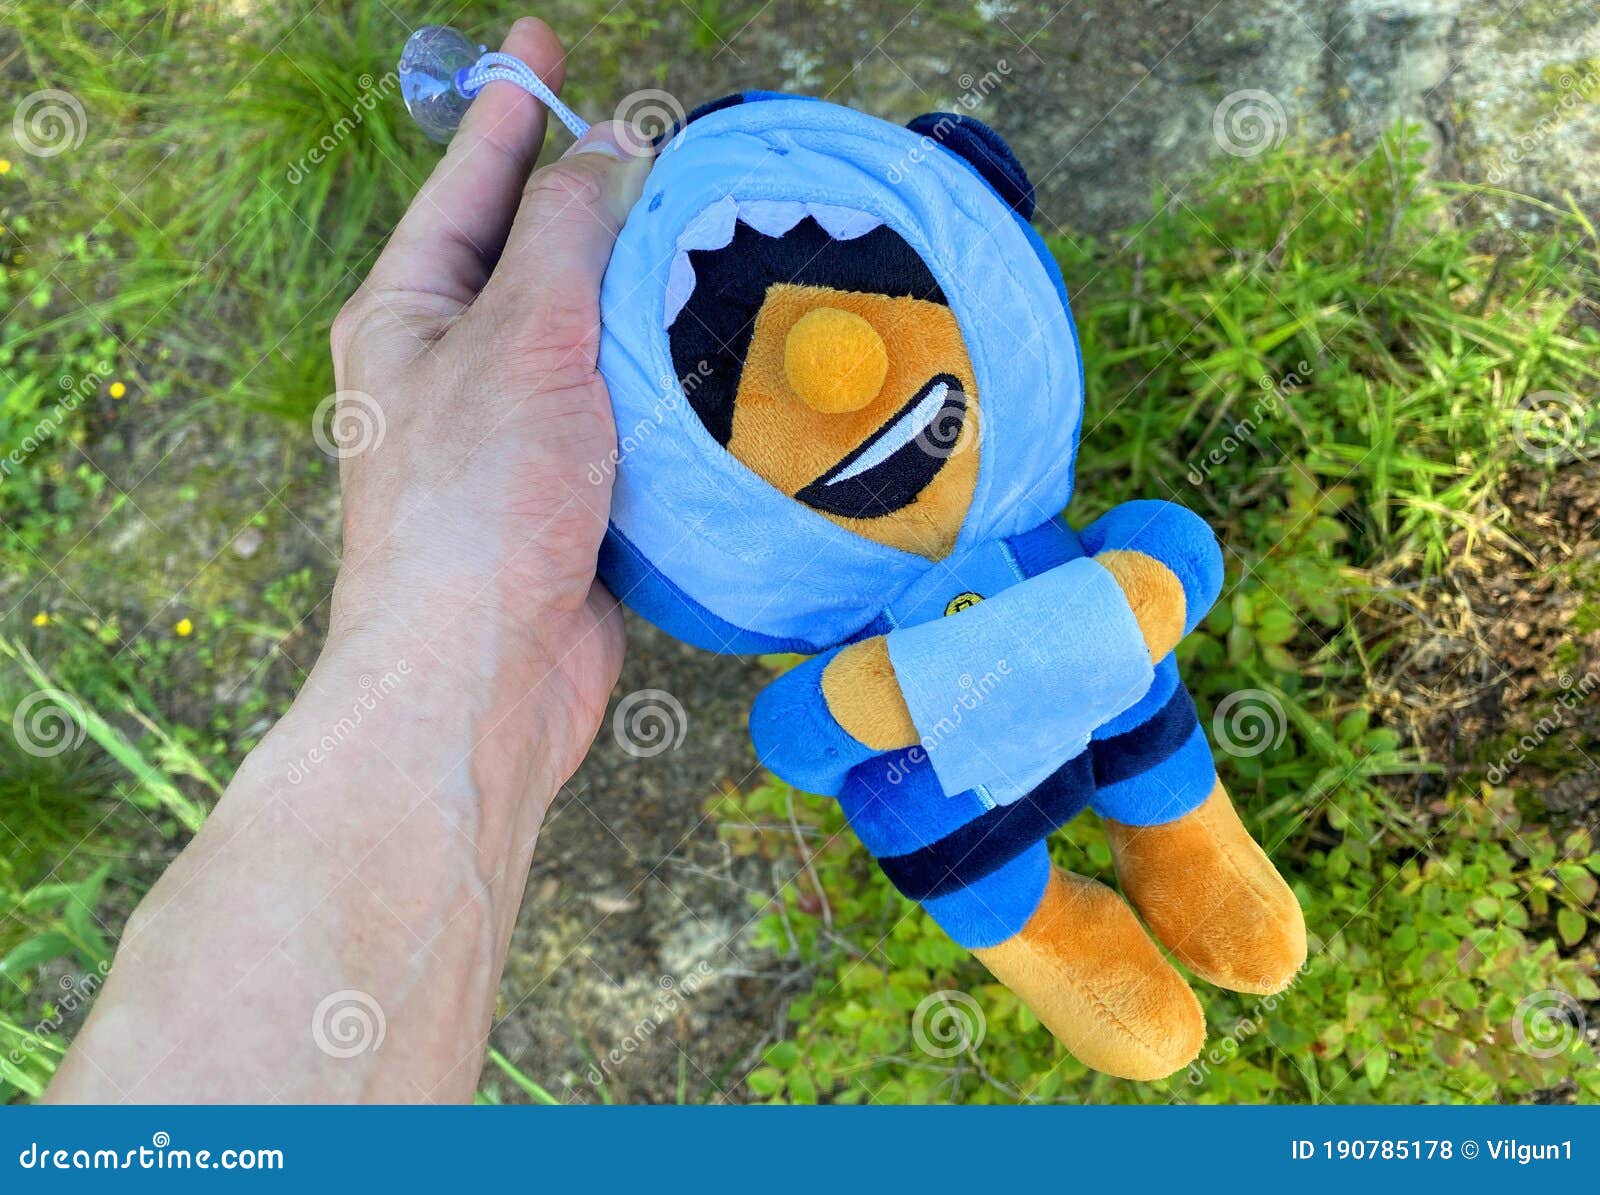 Soft Toy Leon Brawl Stars Soft Toy Leon Brawl Stars Editorial Stock Photo Image Of Cool Game 190785178 - image leon brawls star